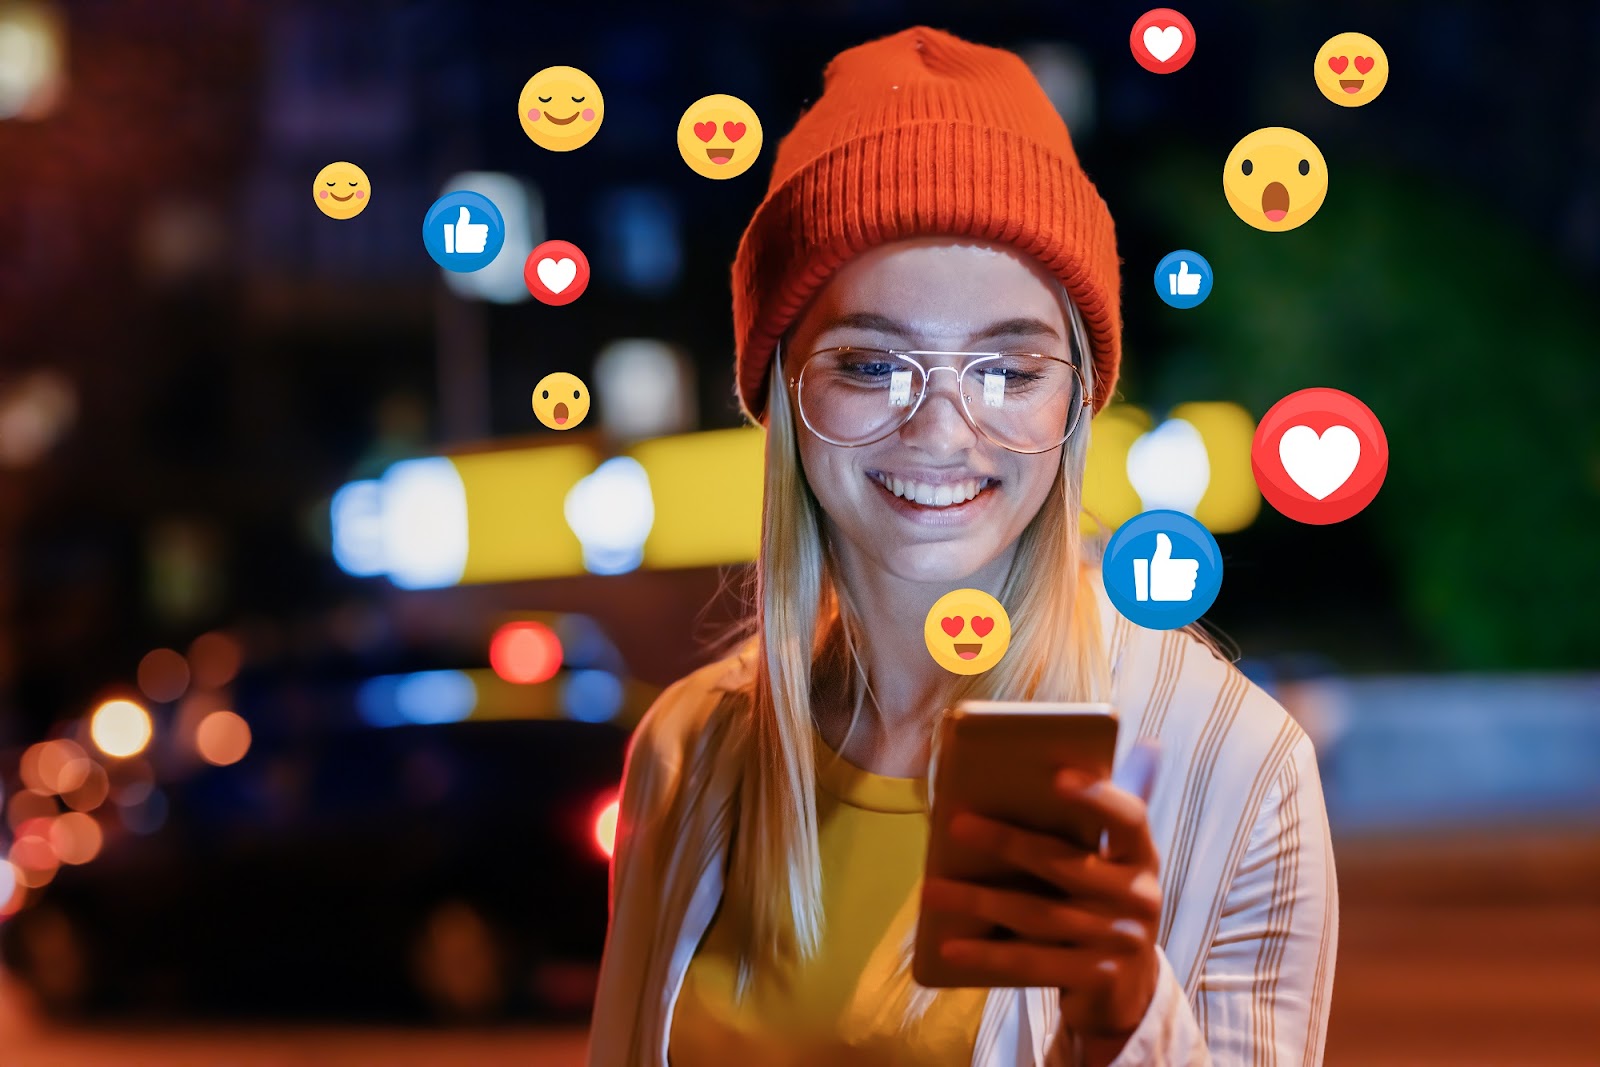 Woman looking at cell phone in her hand with emoji graphics scattered in background